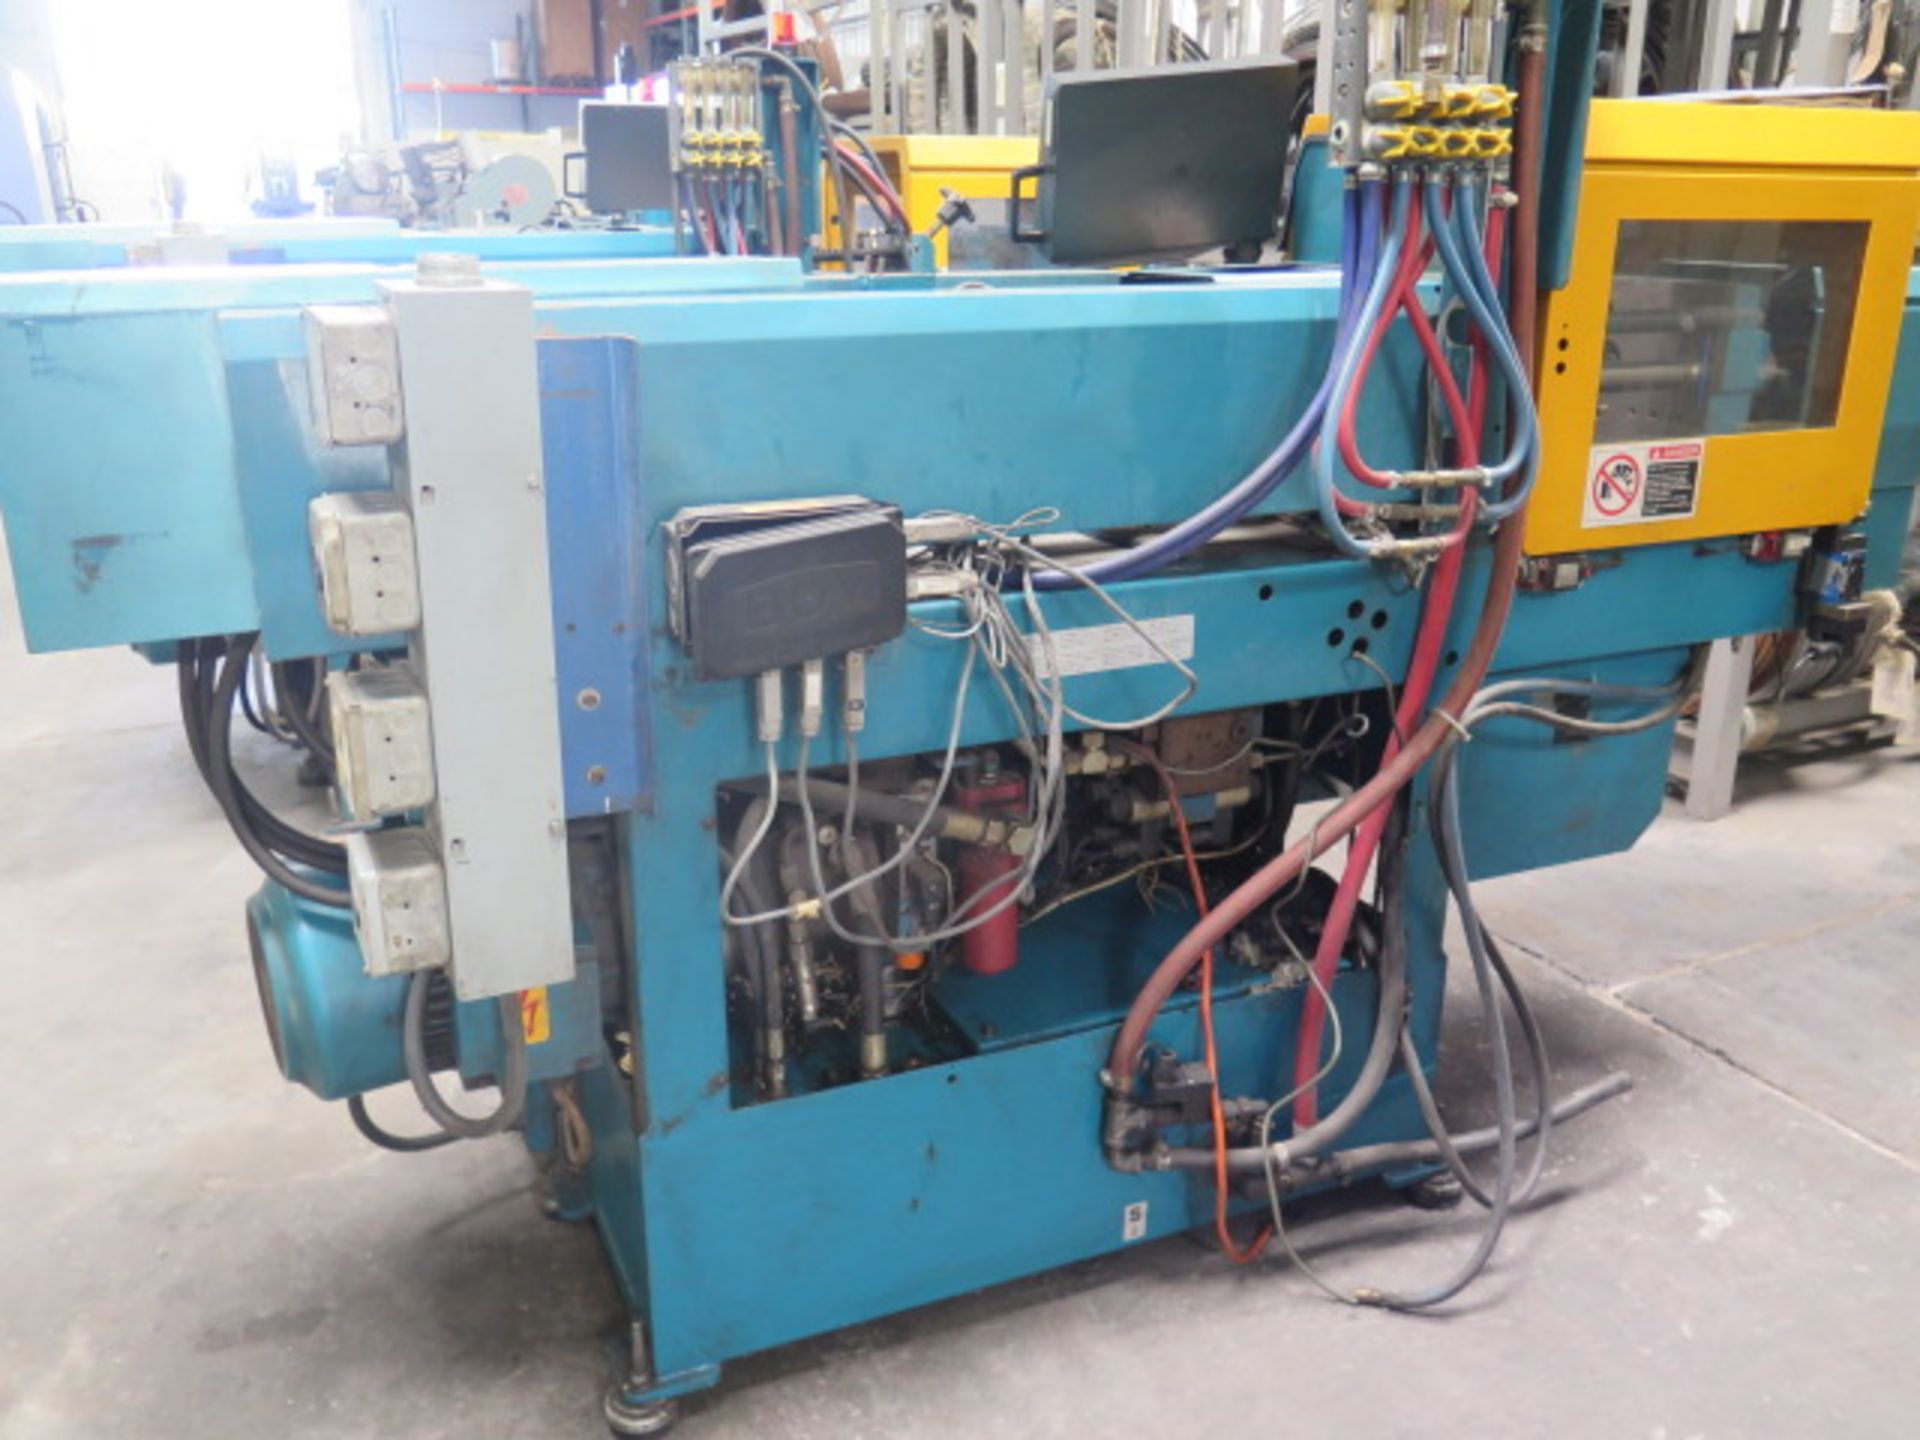 2000 Boy 22M 24 Ton Plastic Injection Molding Machine s/n 28078 w/ Procam CNC Controls, SOLD AS IS - Image 14 of 15